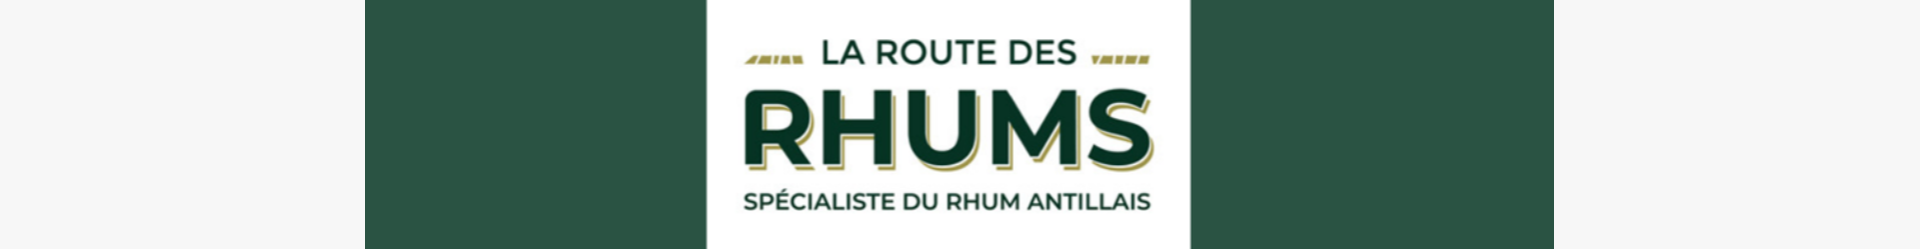 Route-Rhums